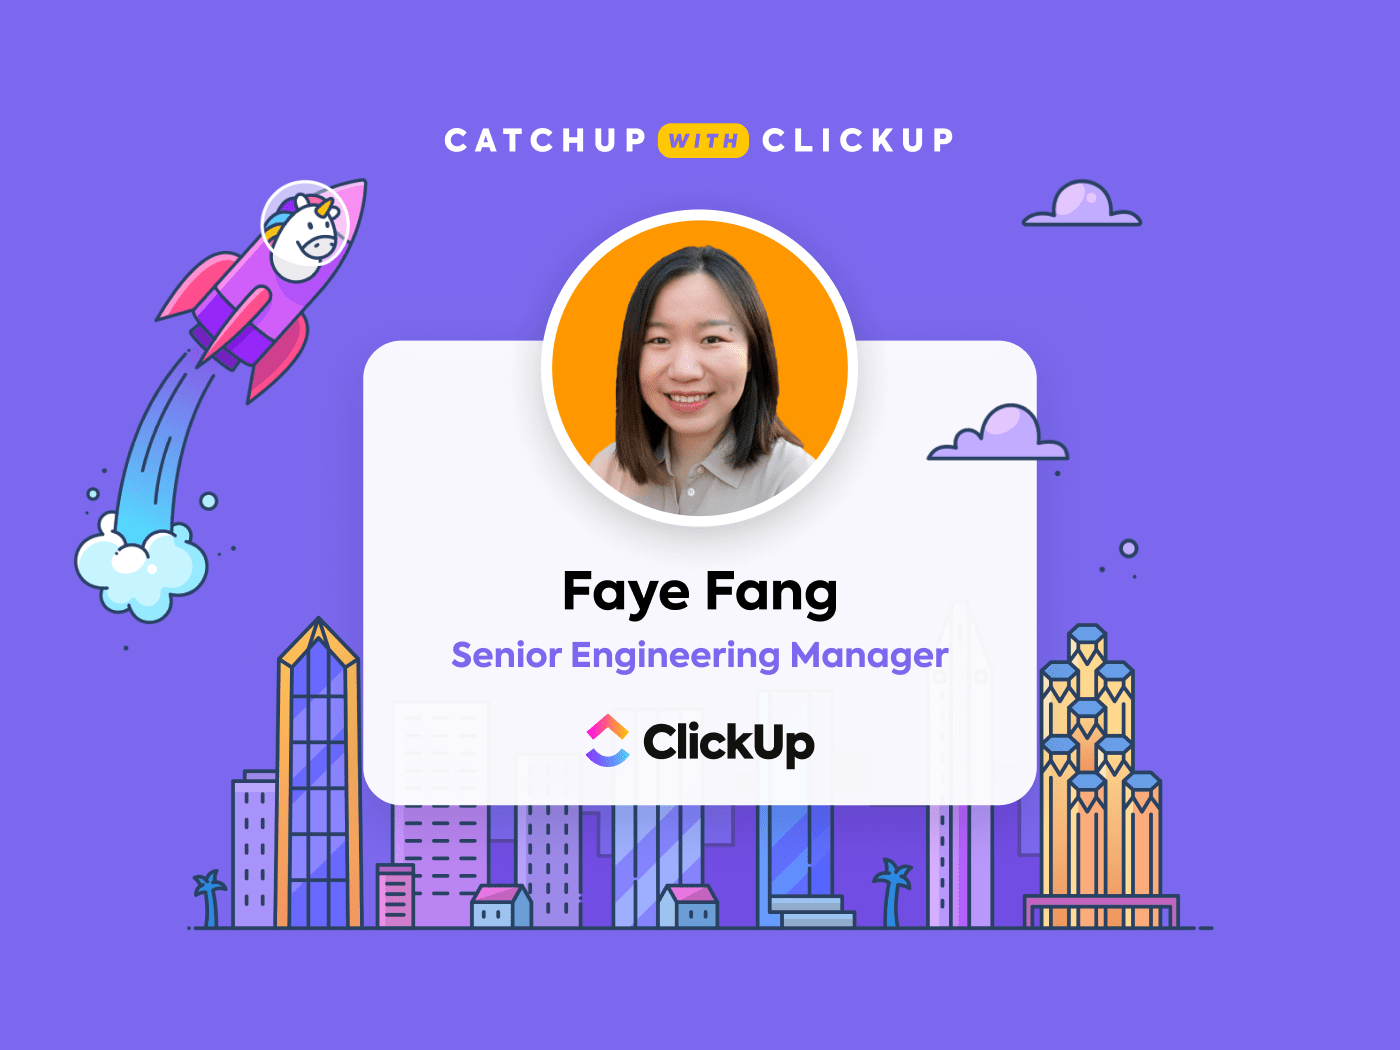 CatchUp With the Crew: Meet Faye Fang